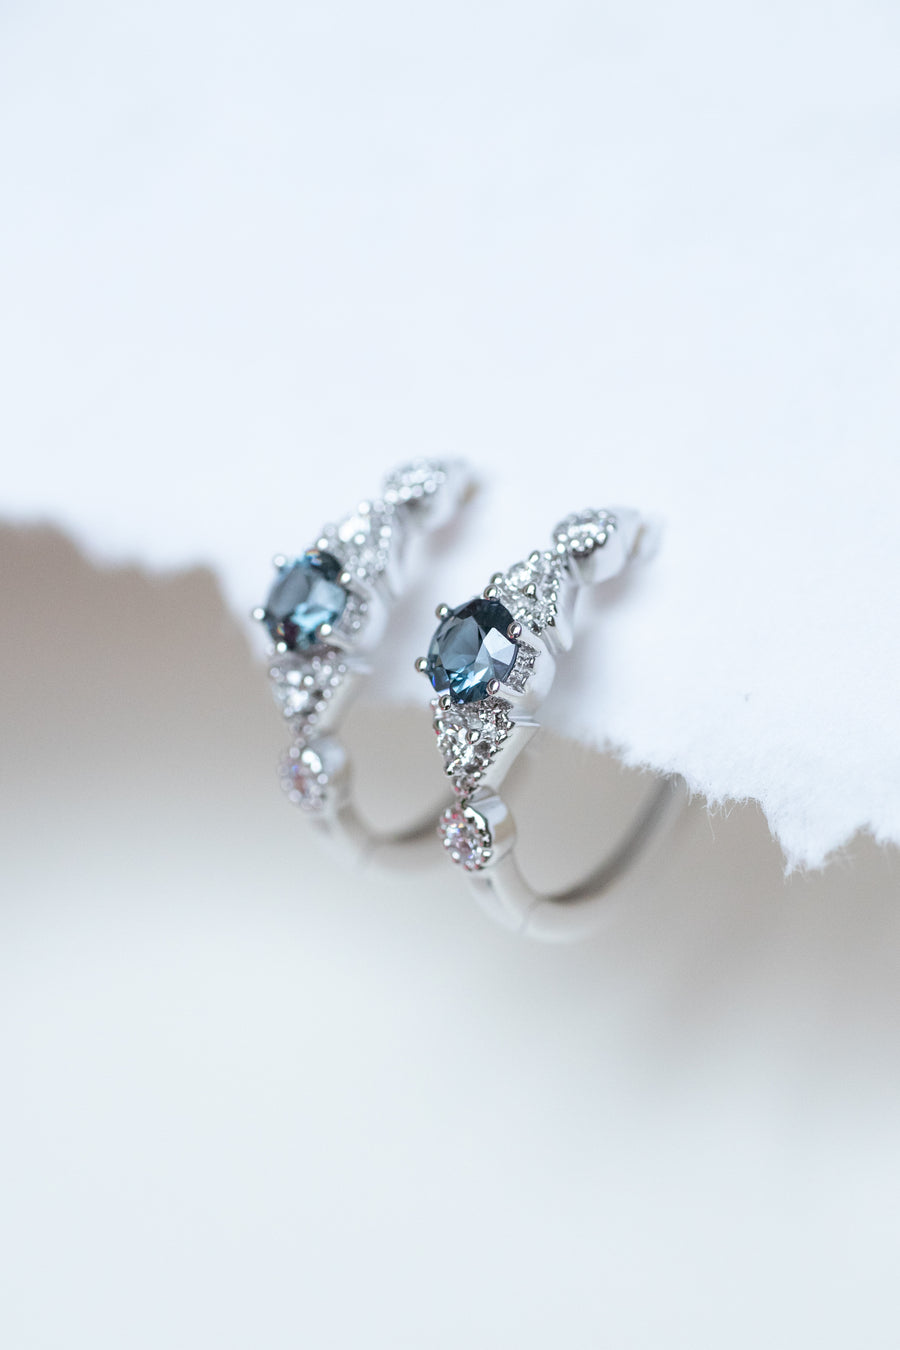 (Preorder) Total 0.50ct Round Grayish Blue Spinel & 0.16ct Diamonds 18K White Gold Hoop Earrings